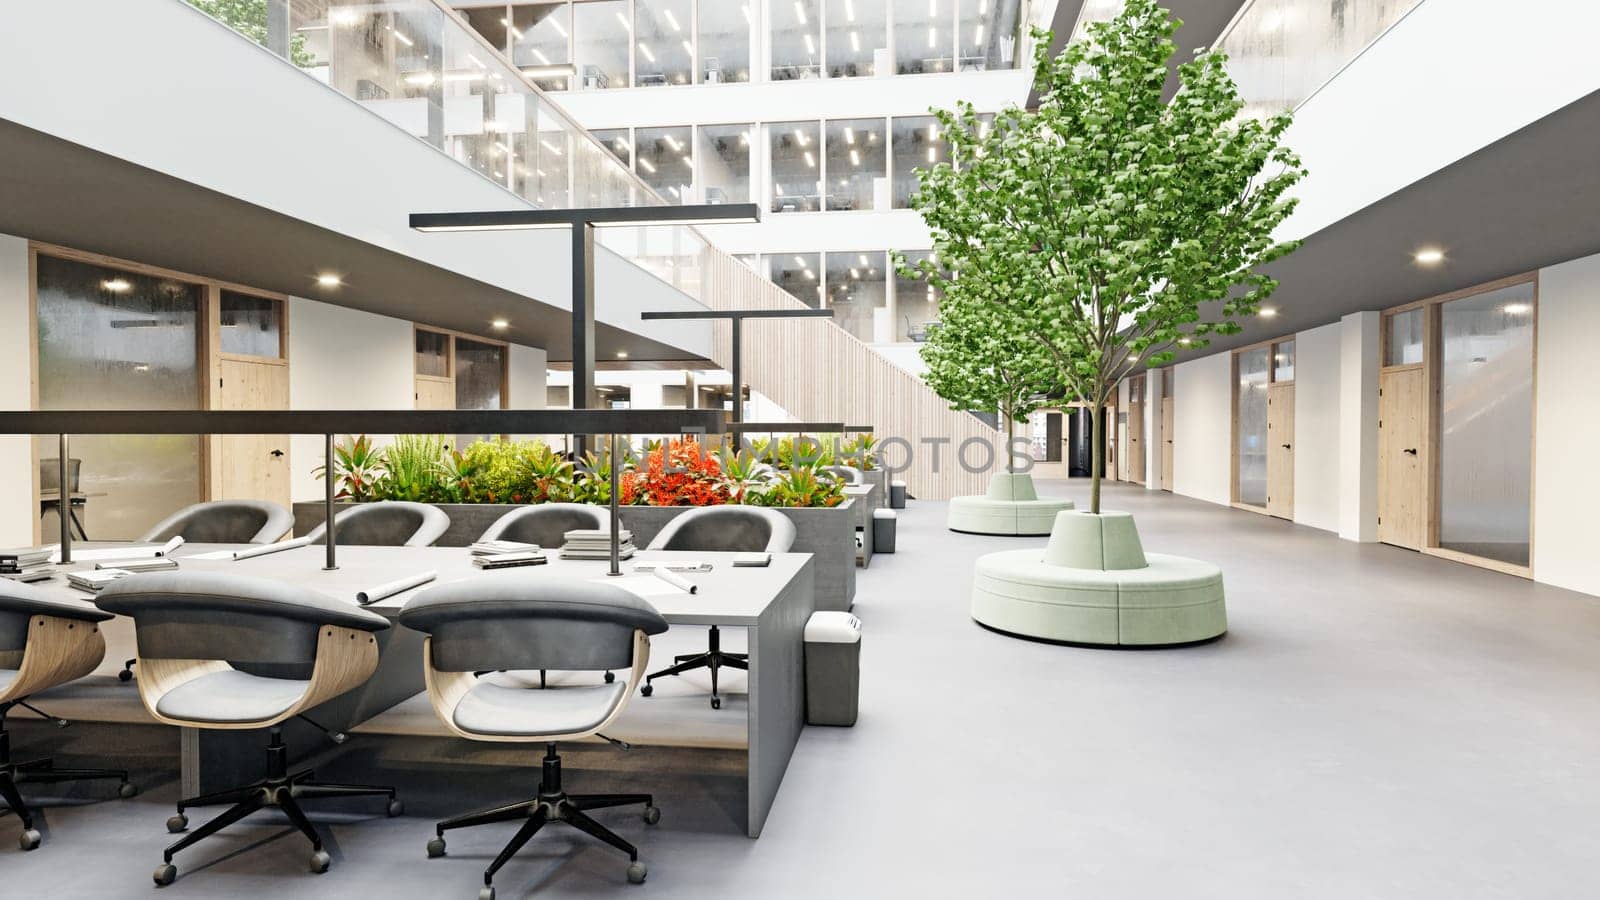 Interior of a modern office building. by vicnt